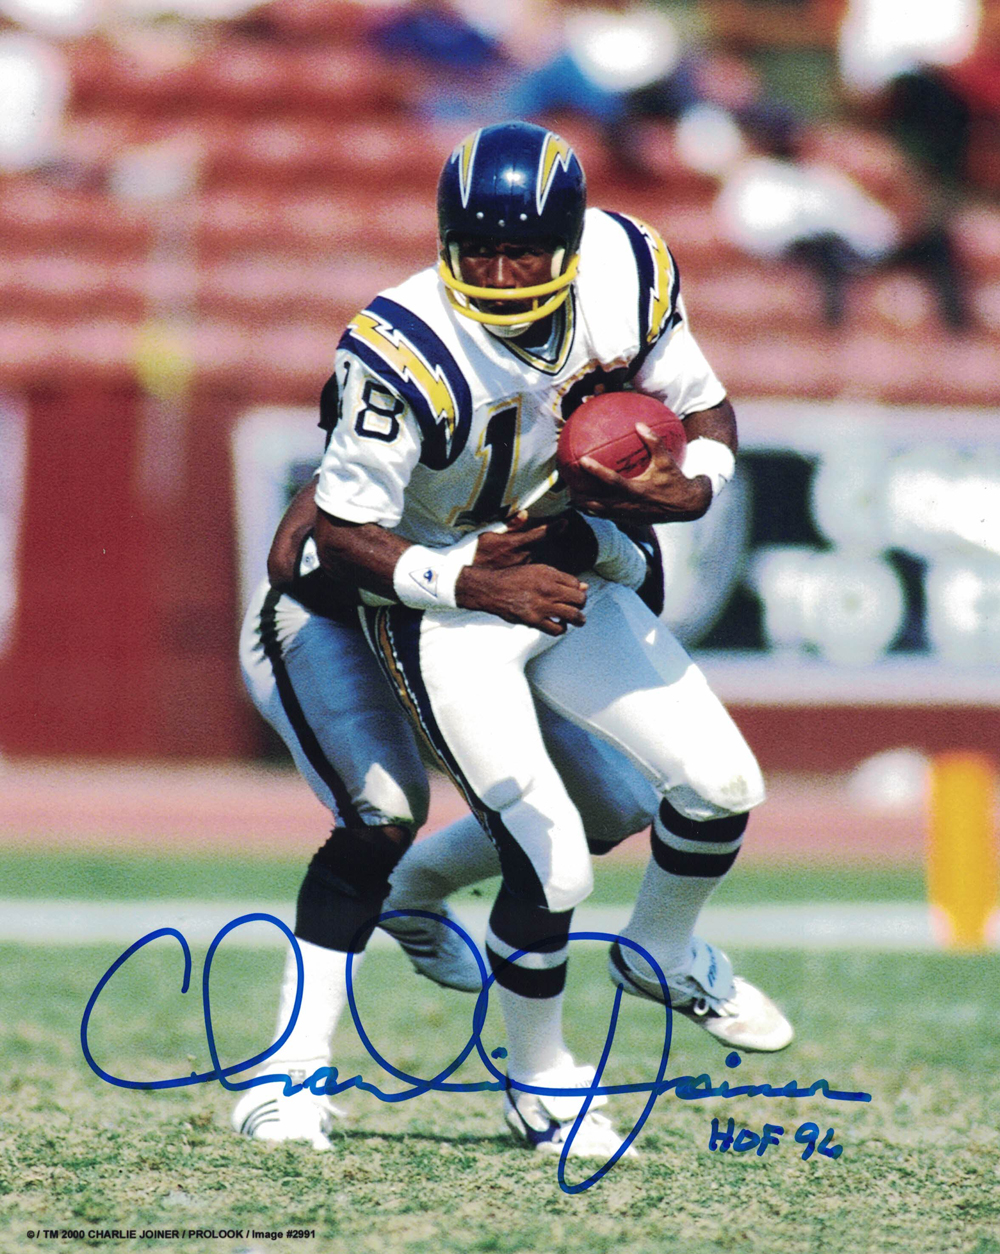 Charlie Joiner Autographed/Signed San Diego Chargers 8x10 Photo 27857